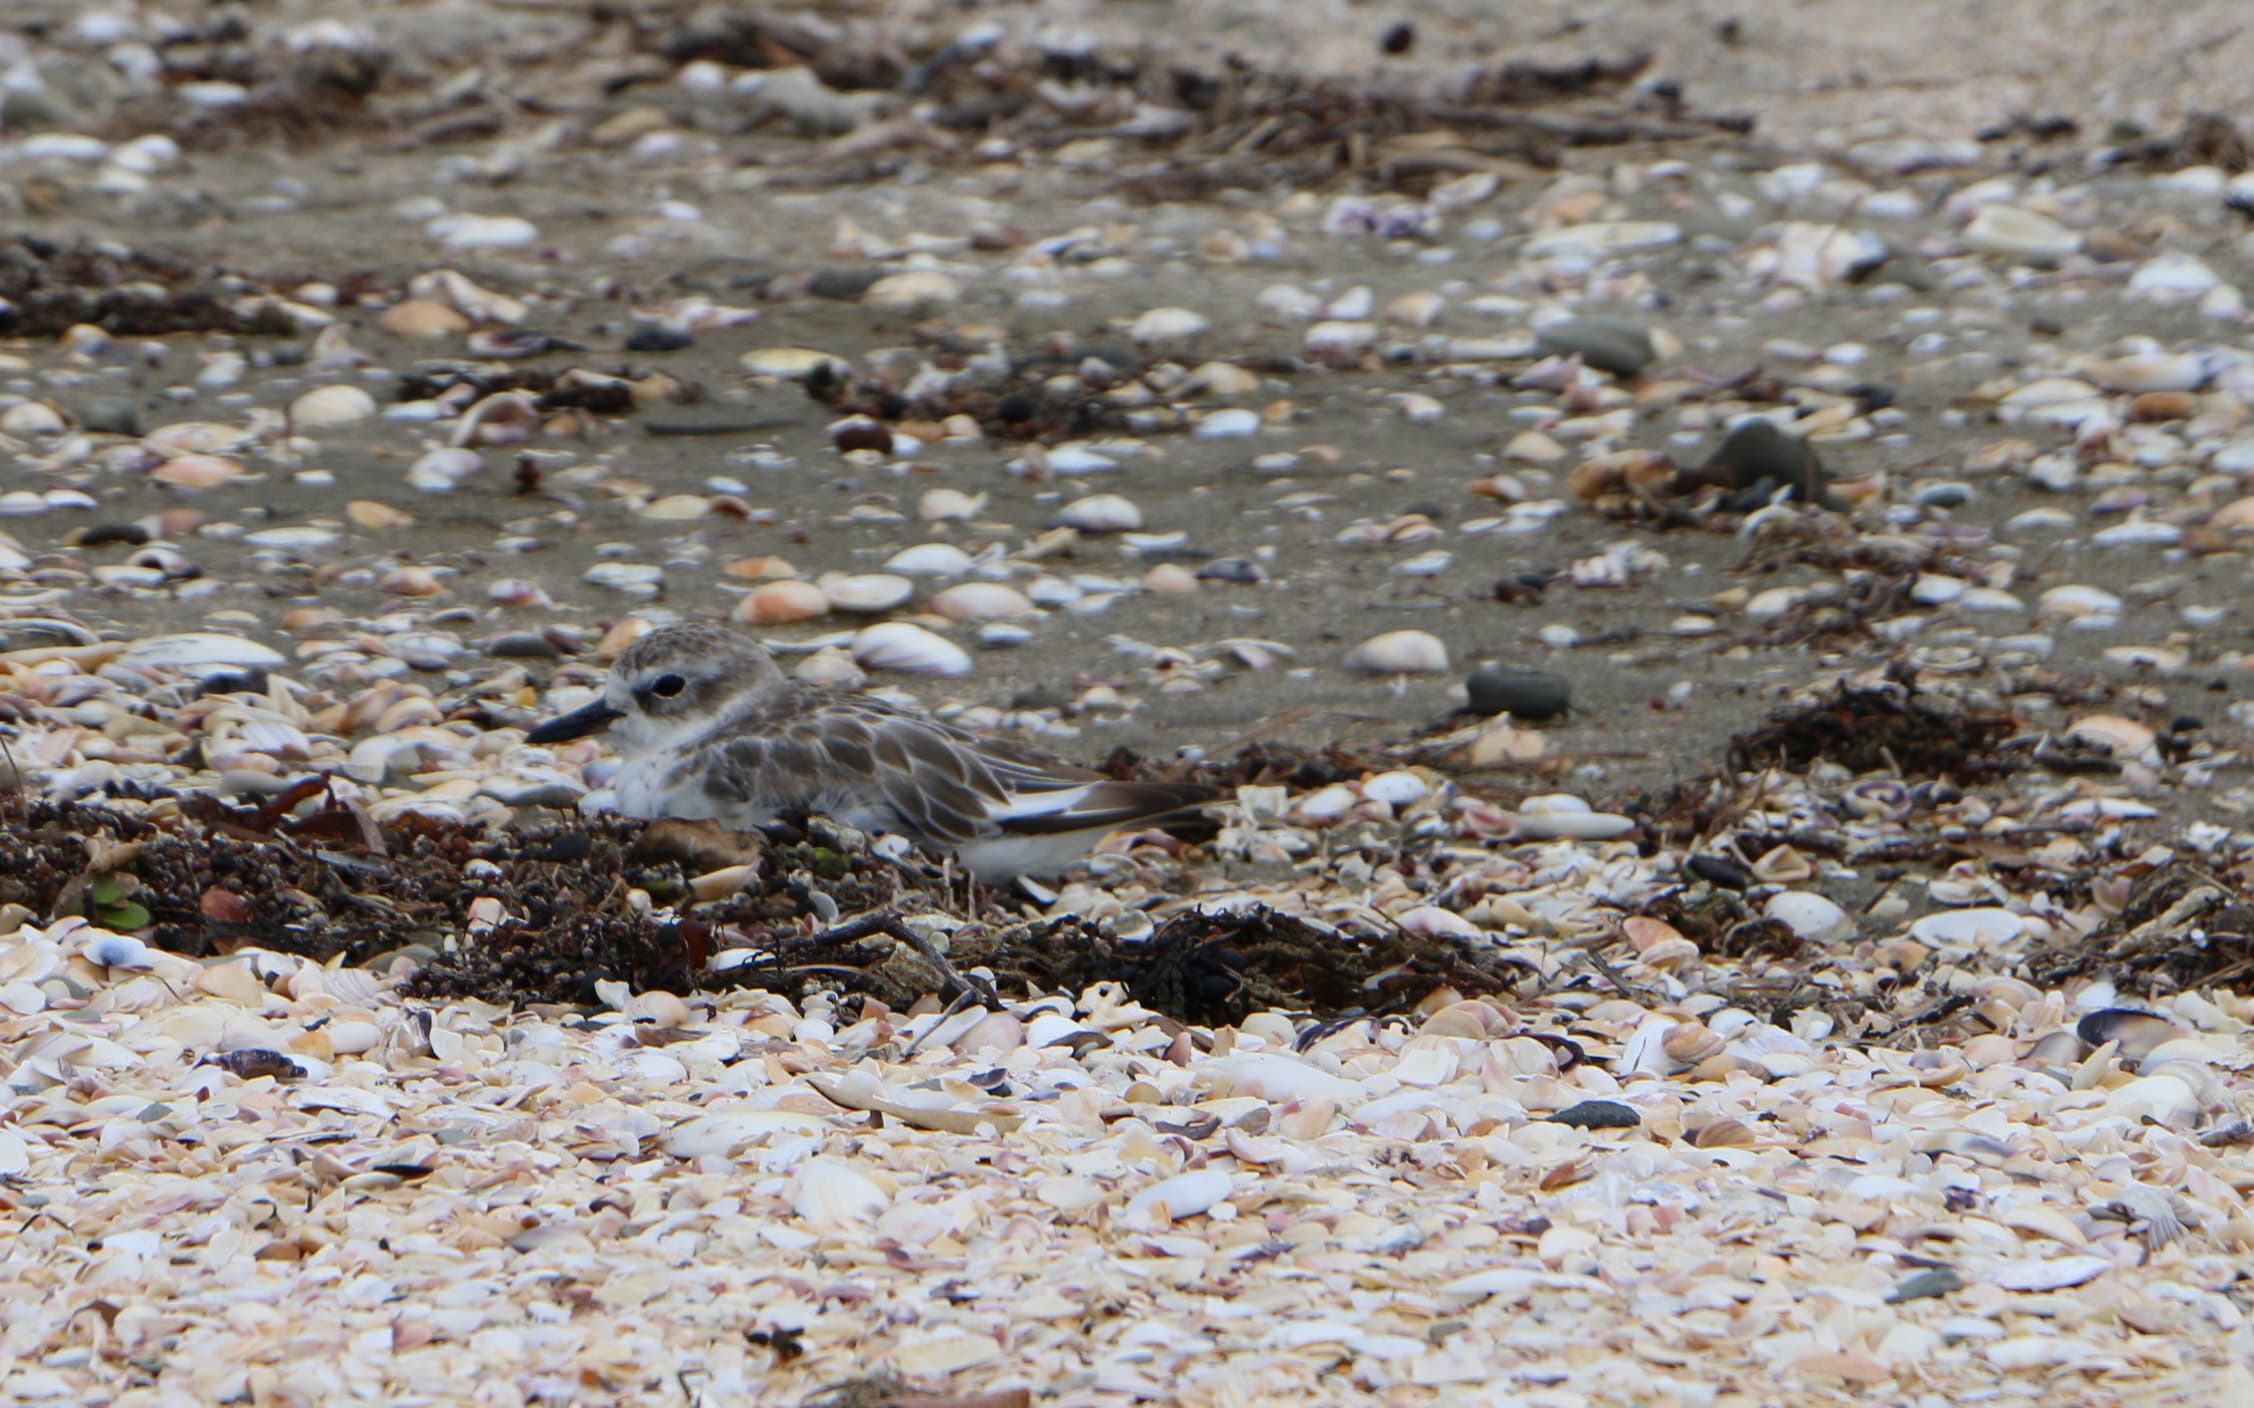 A dotterel in the shells and sand at Te Haruhi Bay.